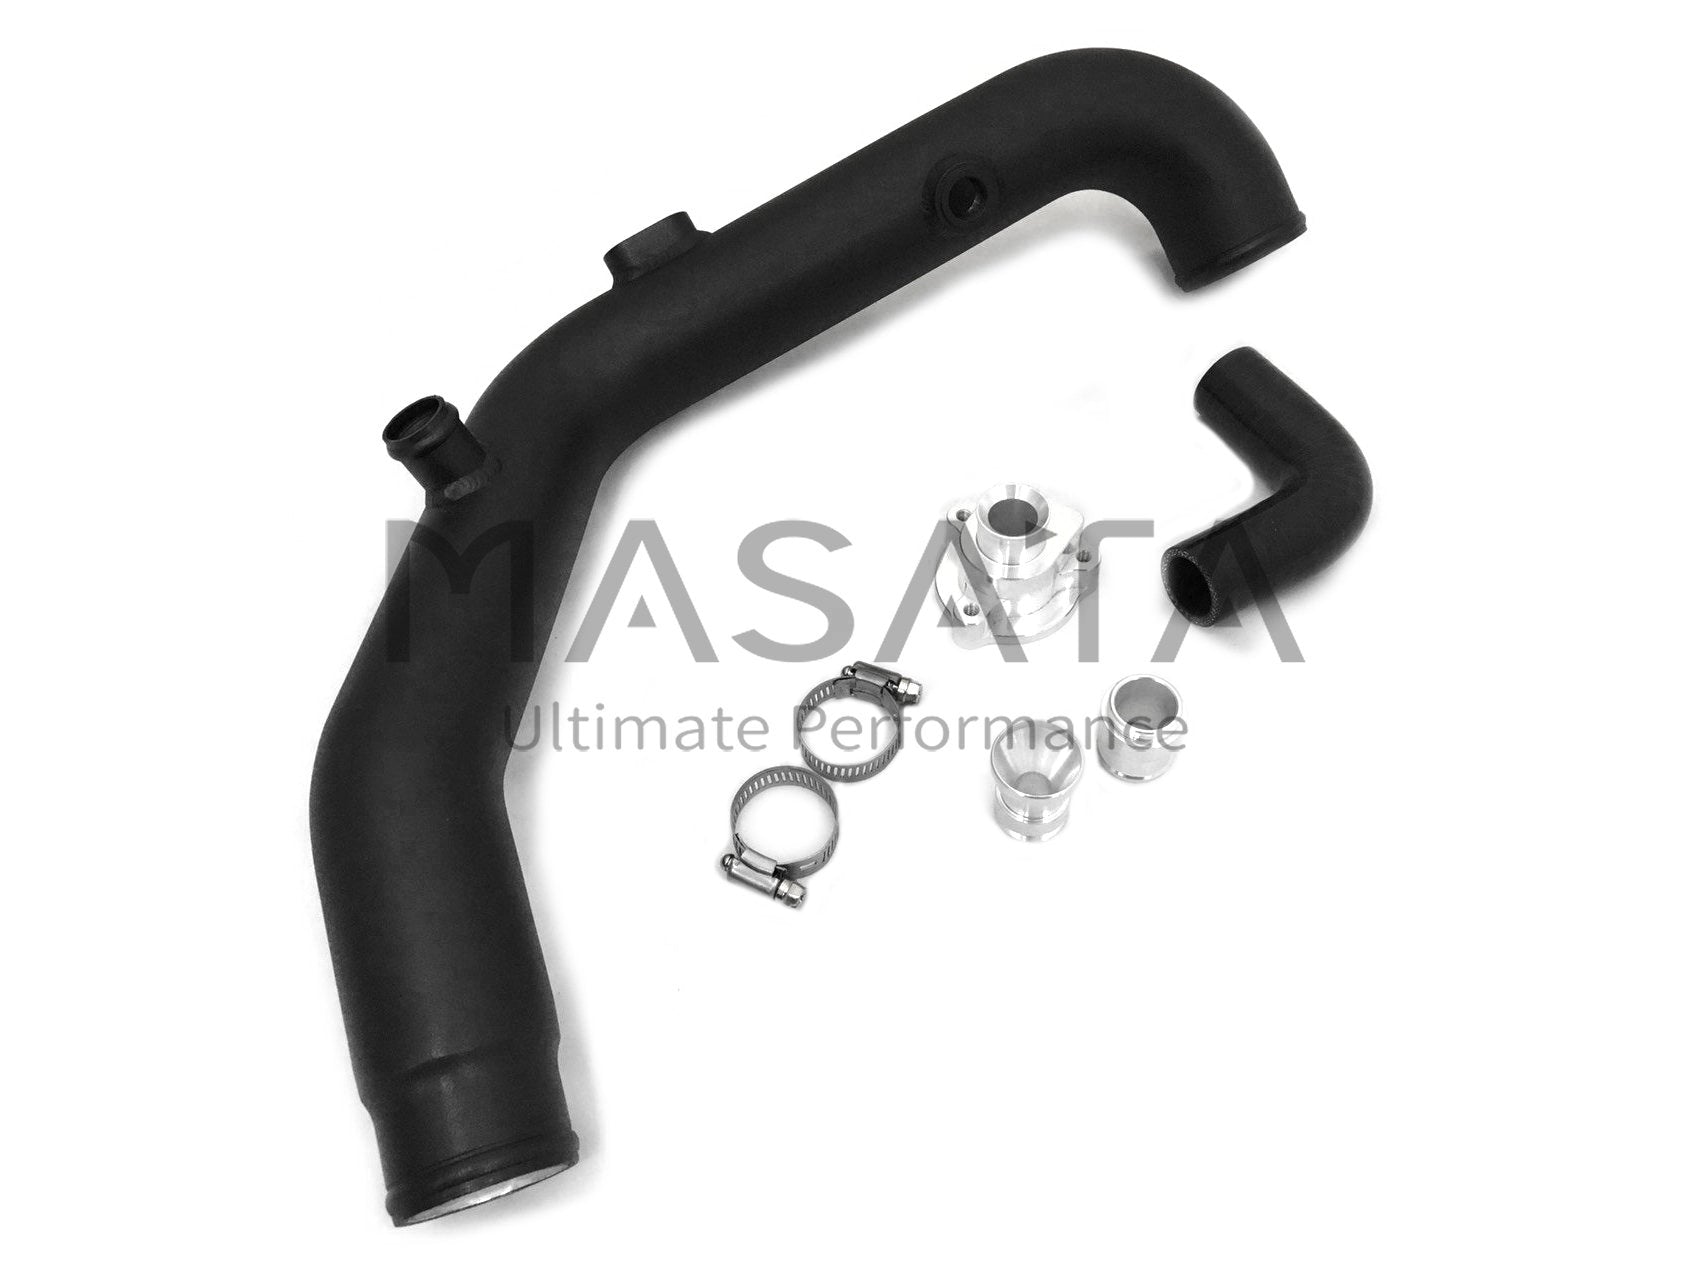 FORD FOCUS (MK) 1.5T Chargepipe & Turbo to Intercooler Pipe Masata UKMasata FORD FOCUS (MK) 1.5T Chargepipe & Turbo to Intercooler Pipe - MASATA UK